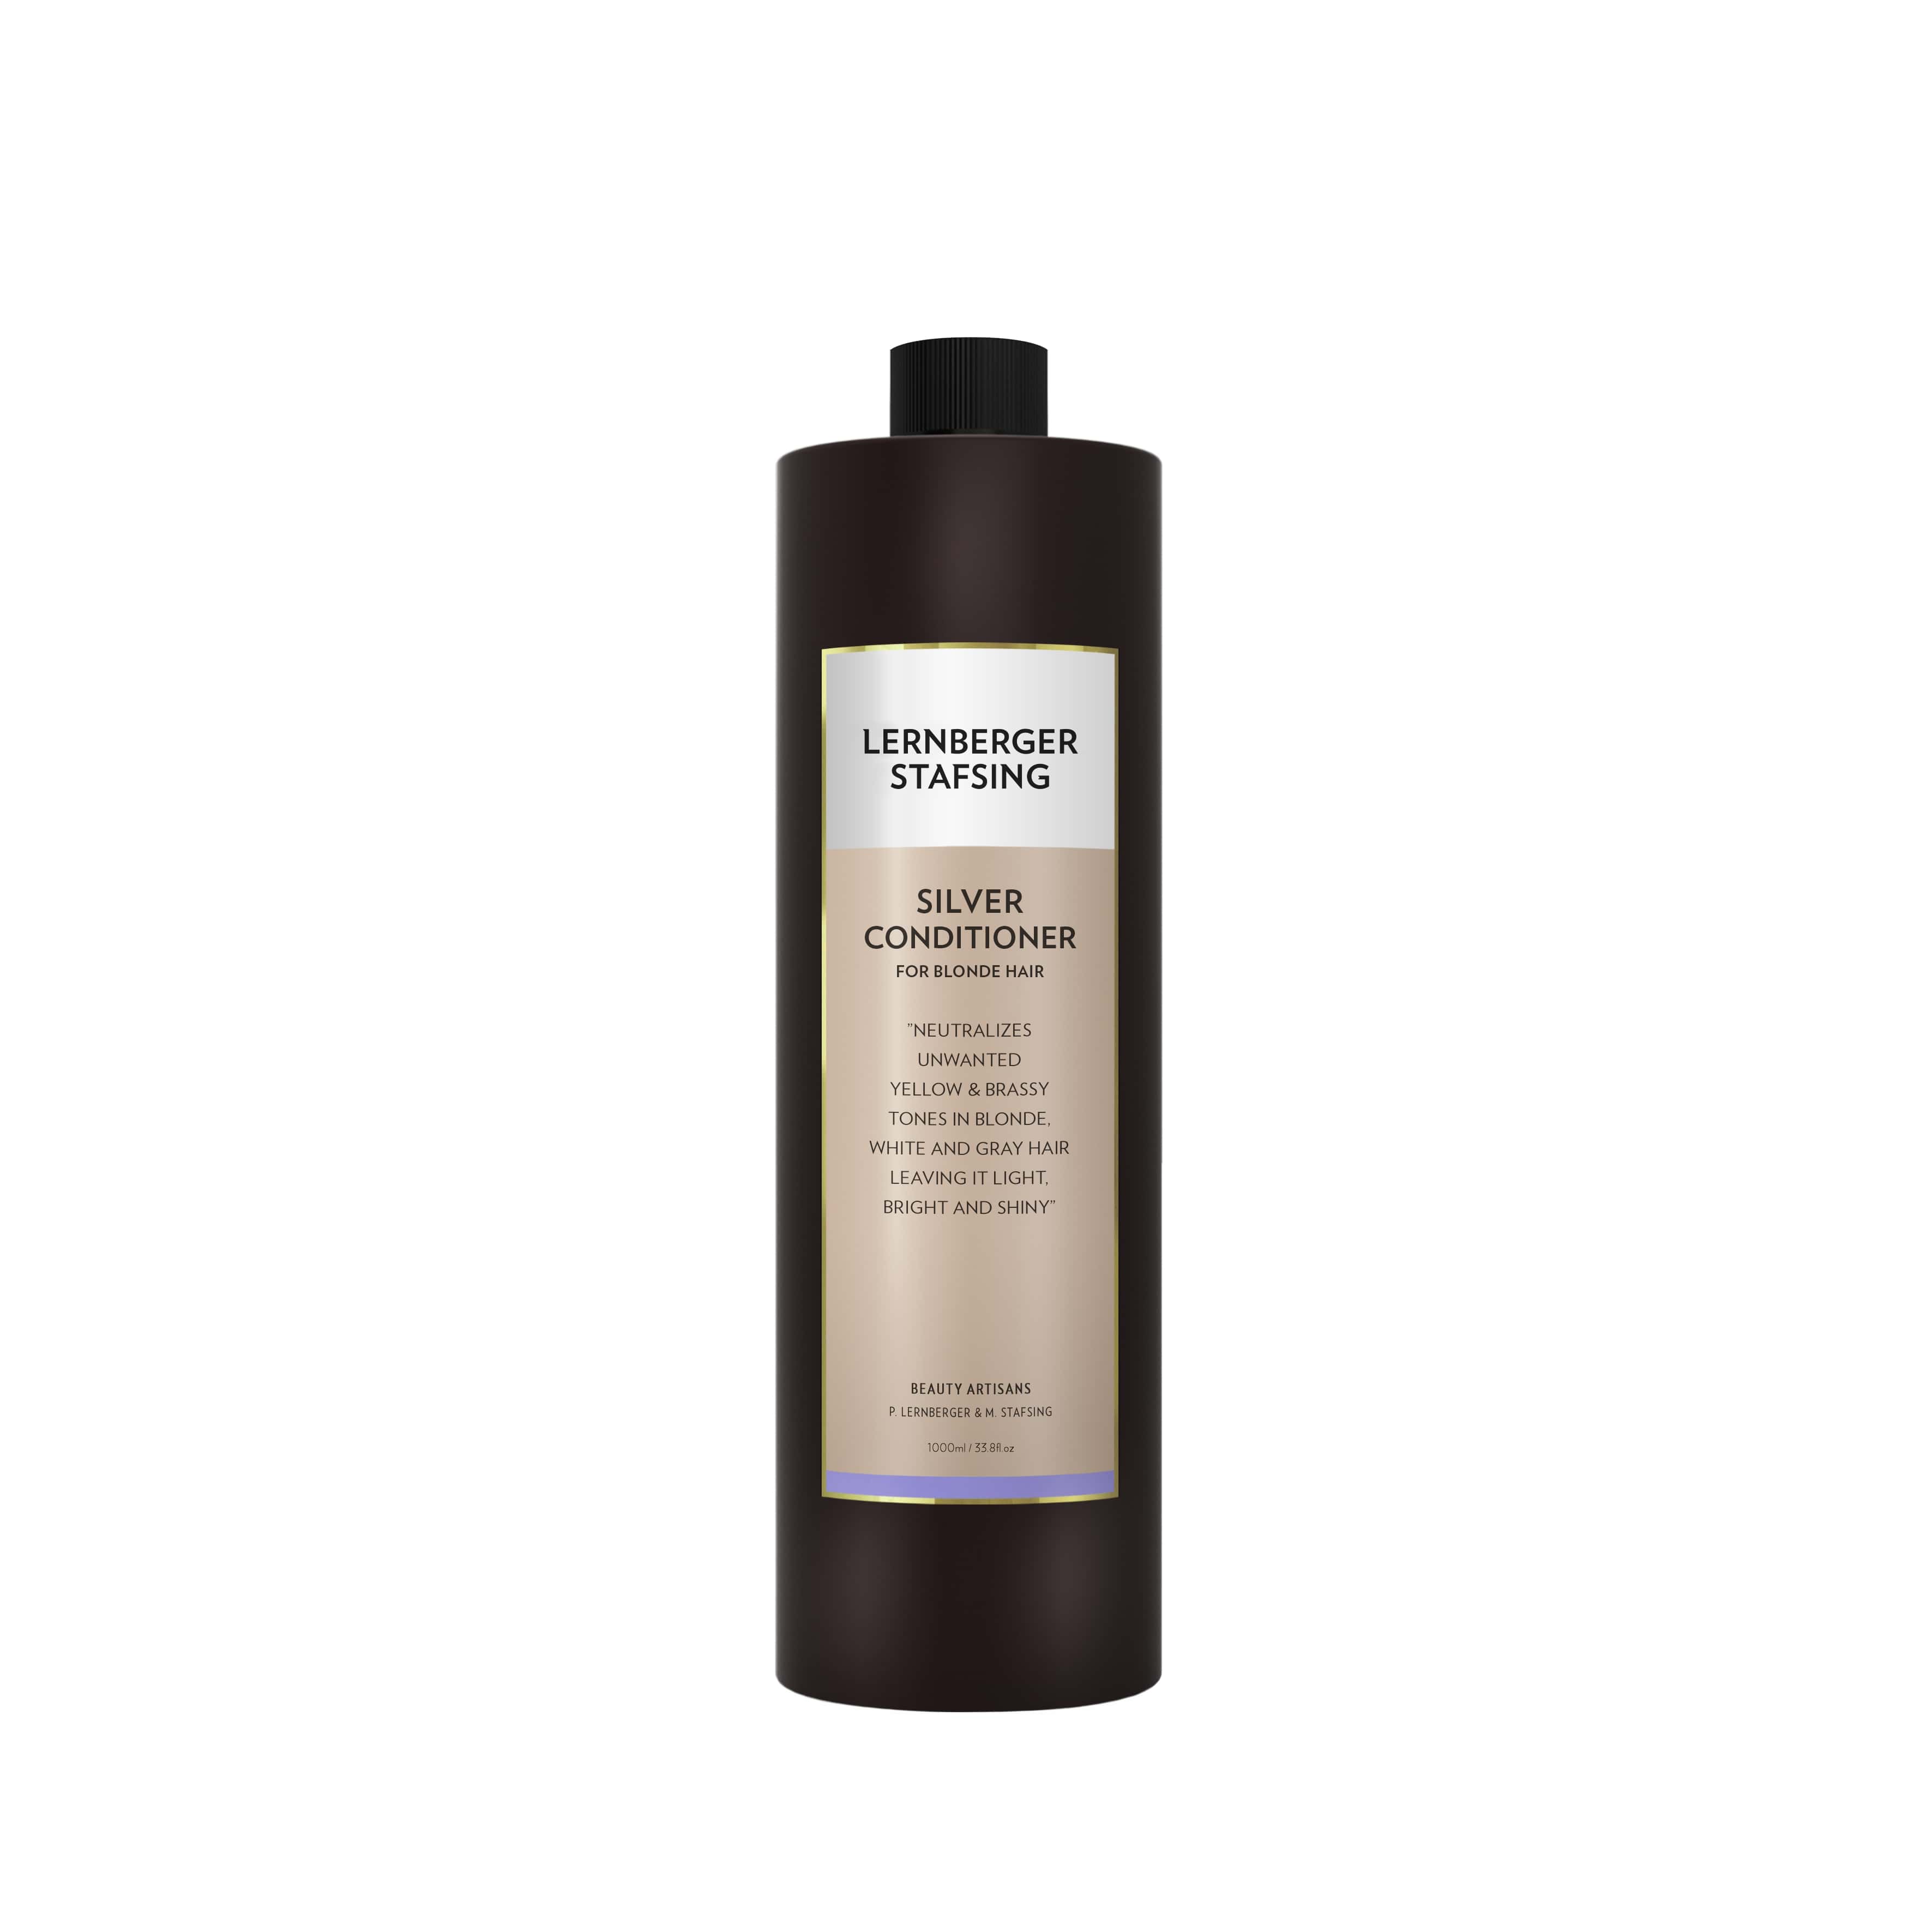  For Blond Hair Silver Conditioner